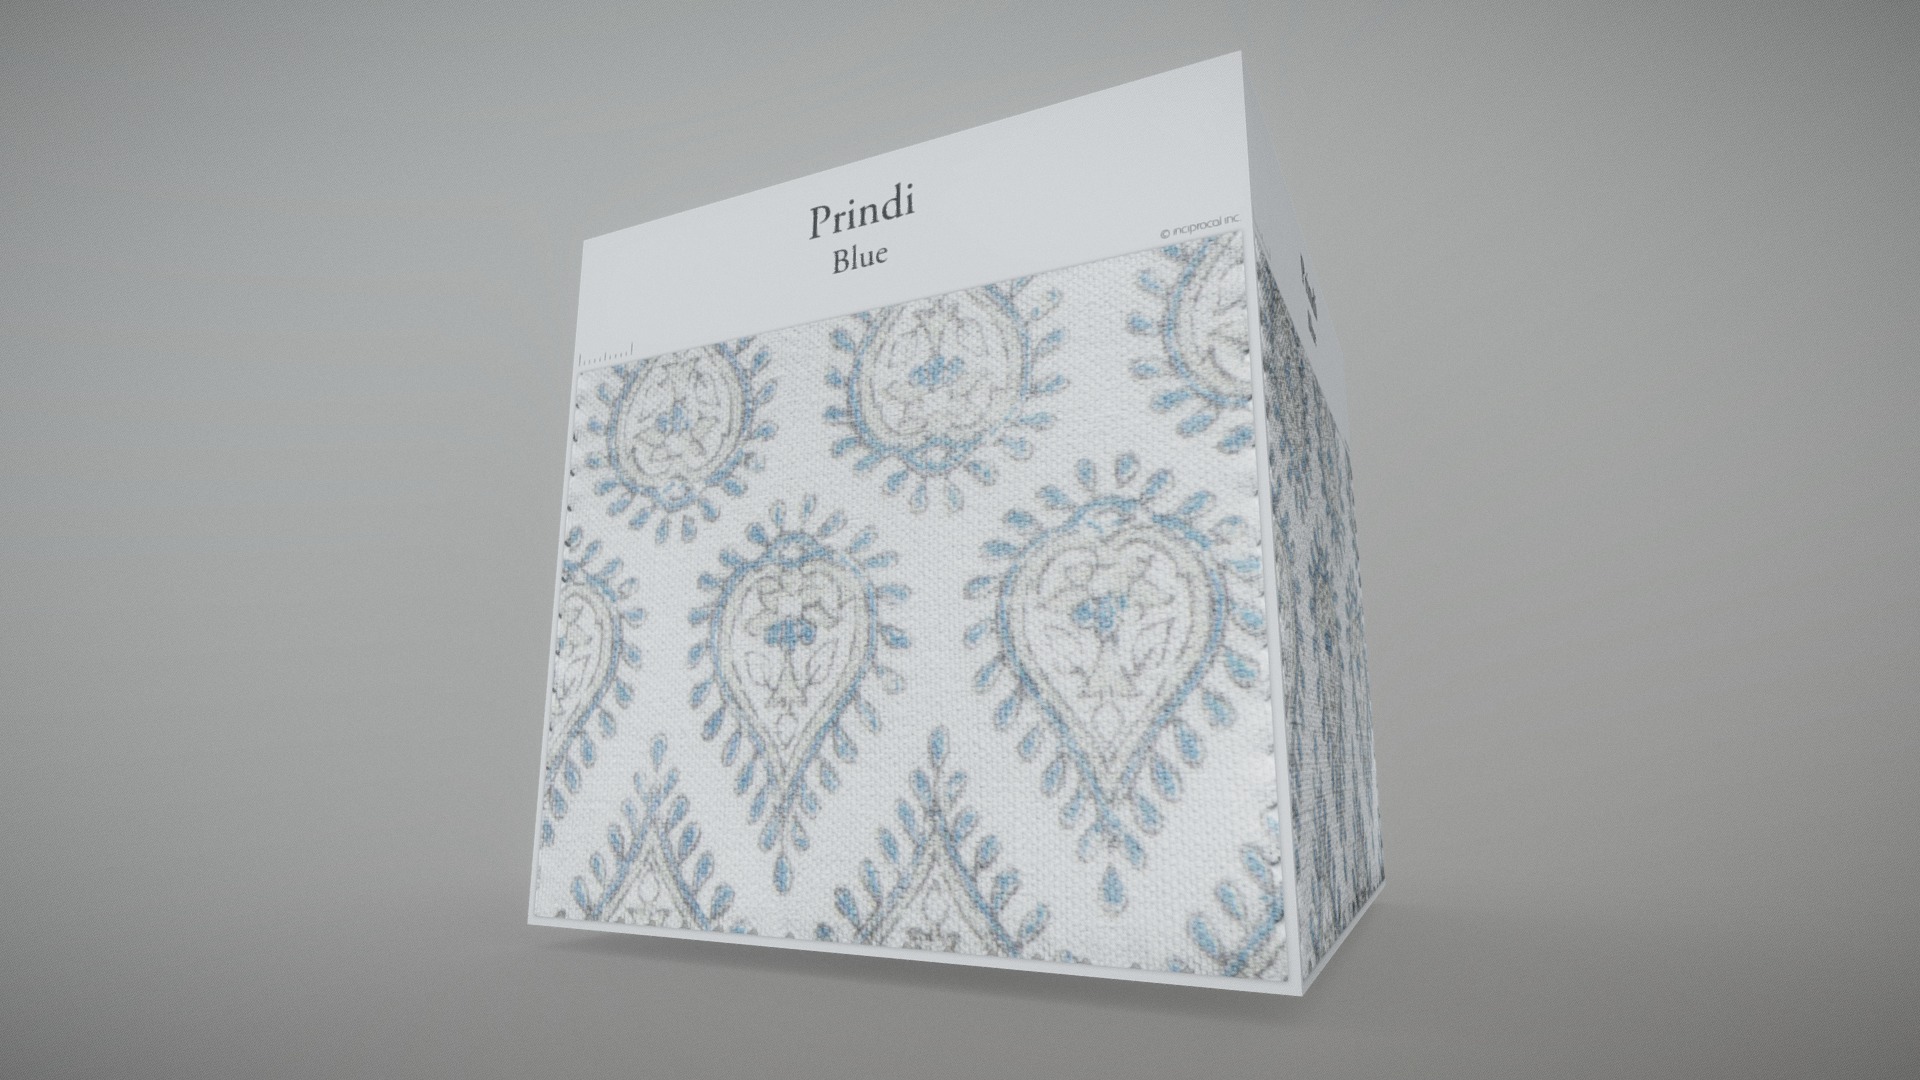 3D model Prindi (Blue) - This is a 3D model of the Prindi (Blue). The 3D model is about a piece of paper with a drawing on it.